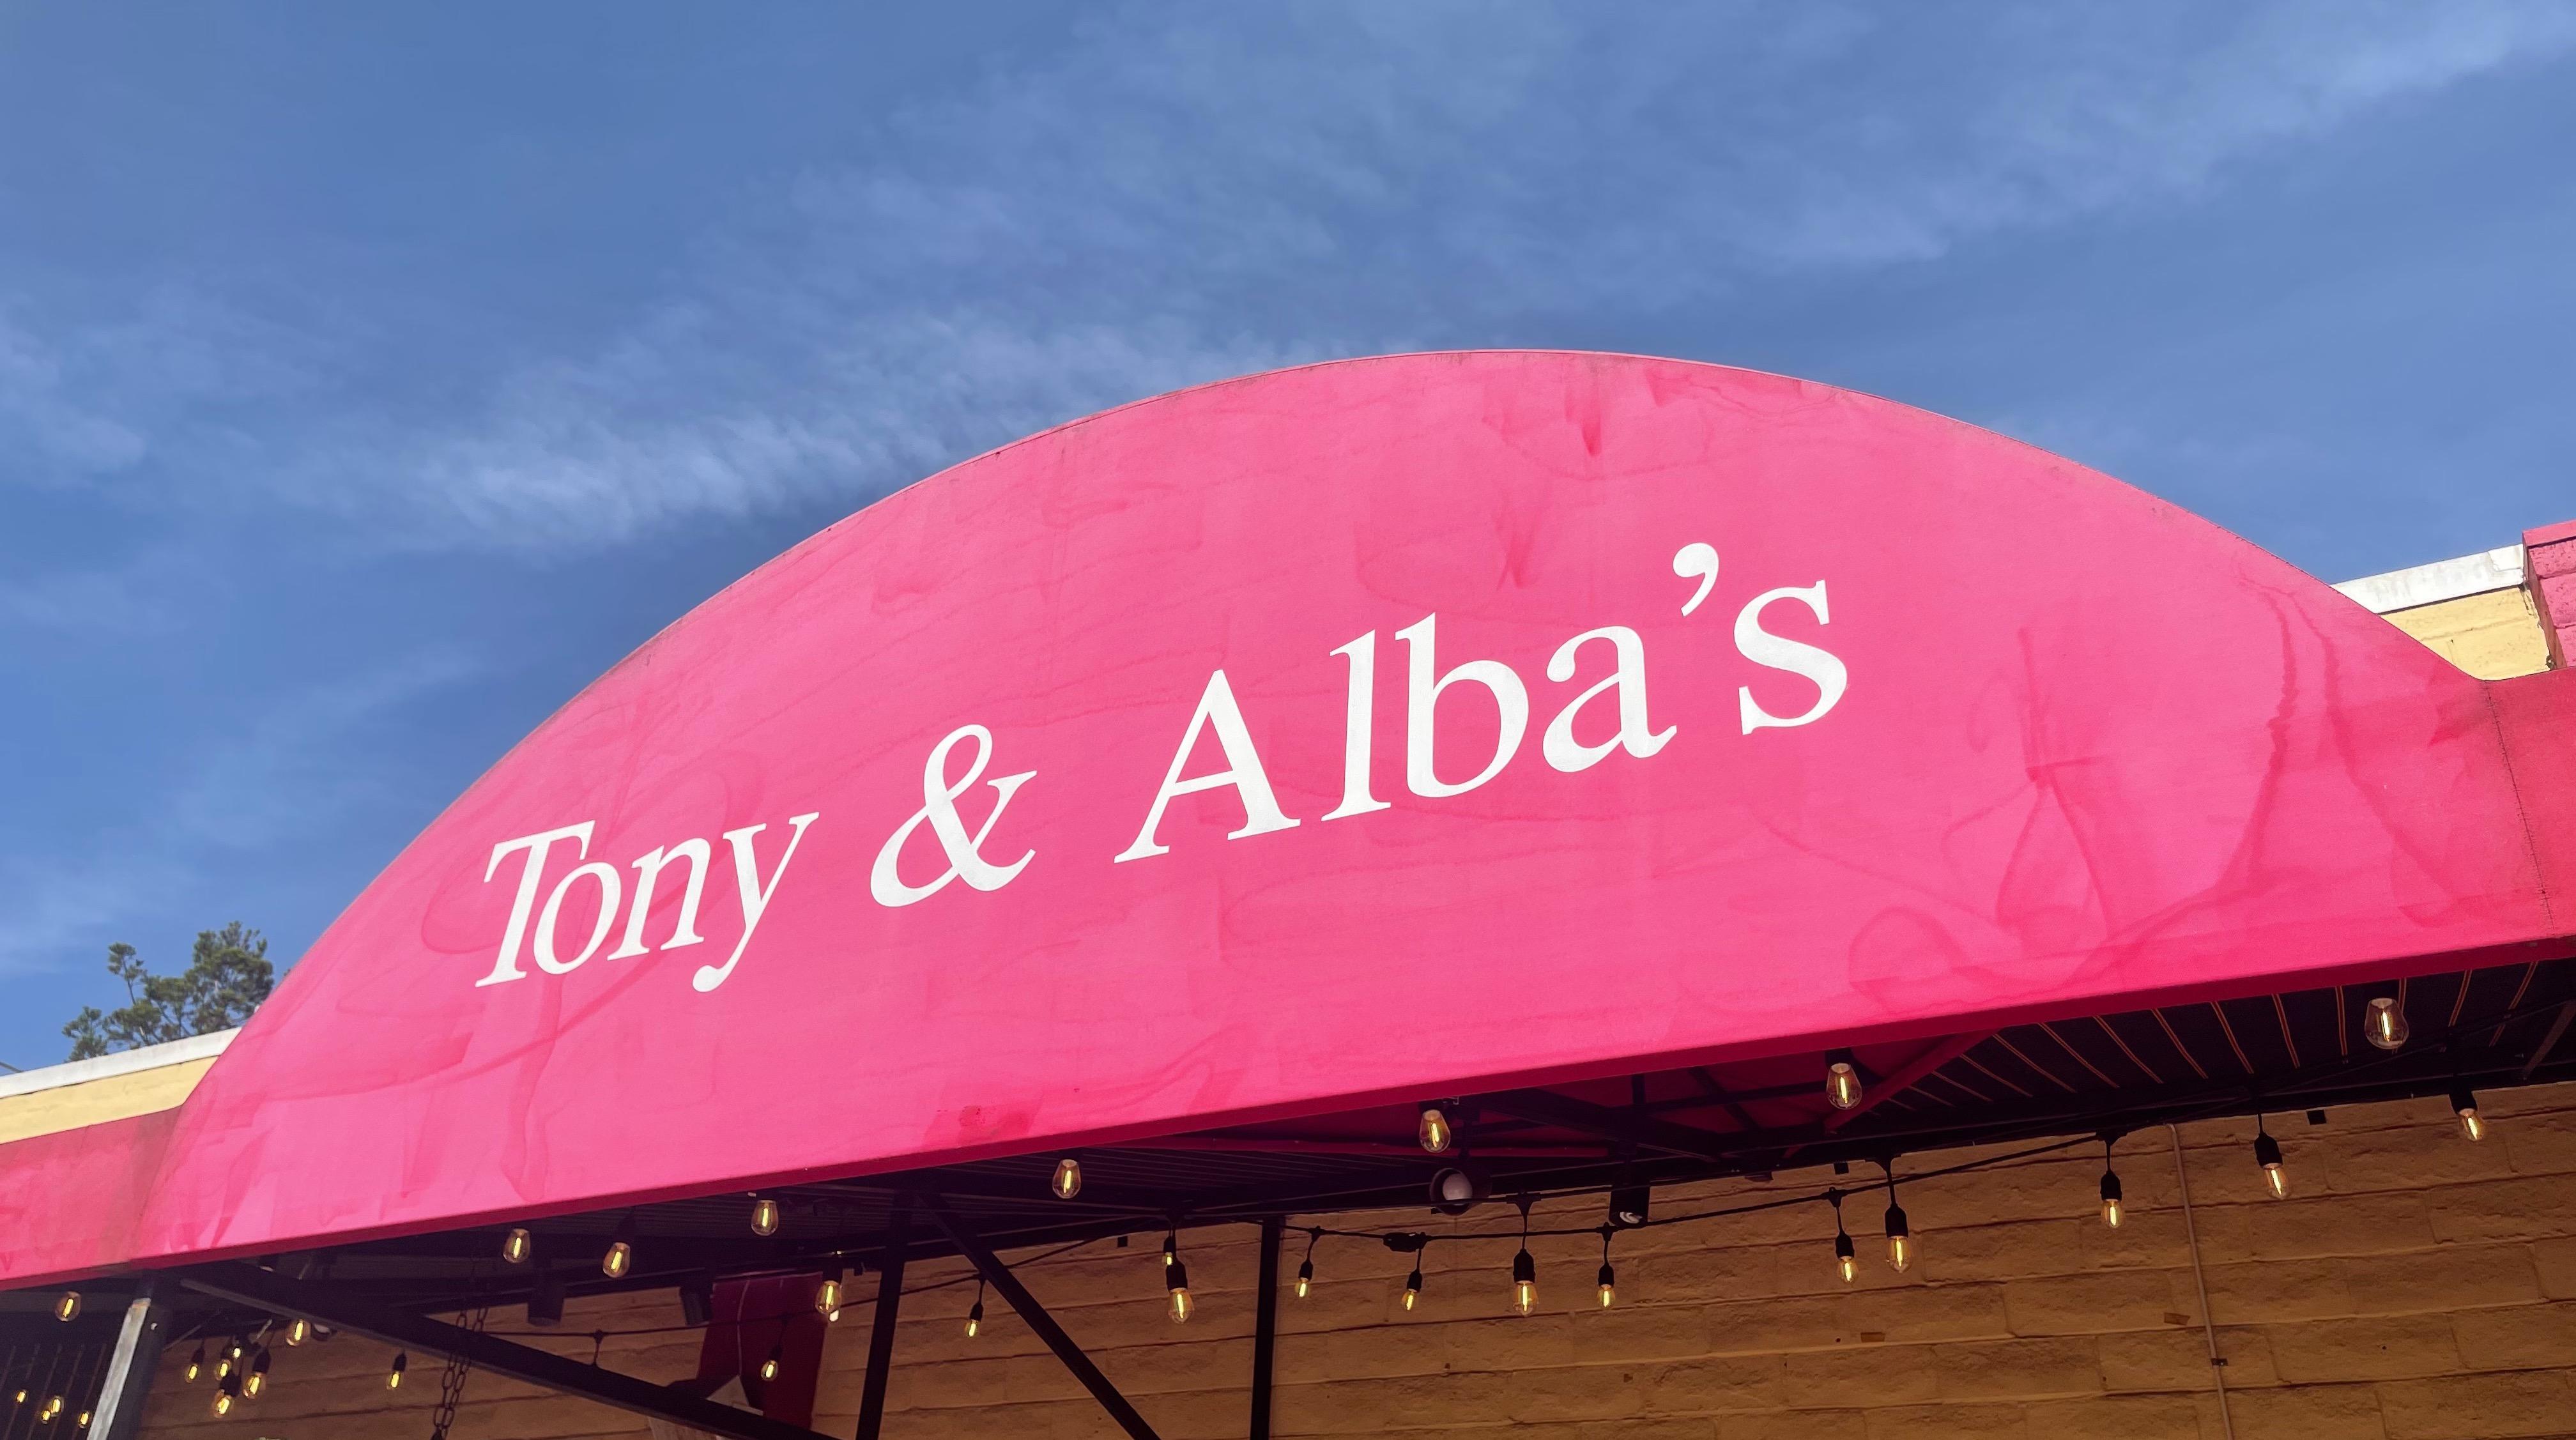 Tony and Alba's Pizzeria Flourishes With a Strong Sense of Community